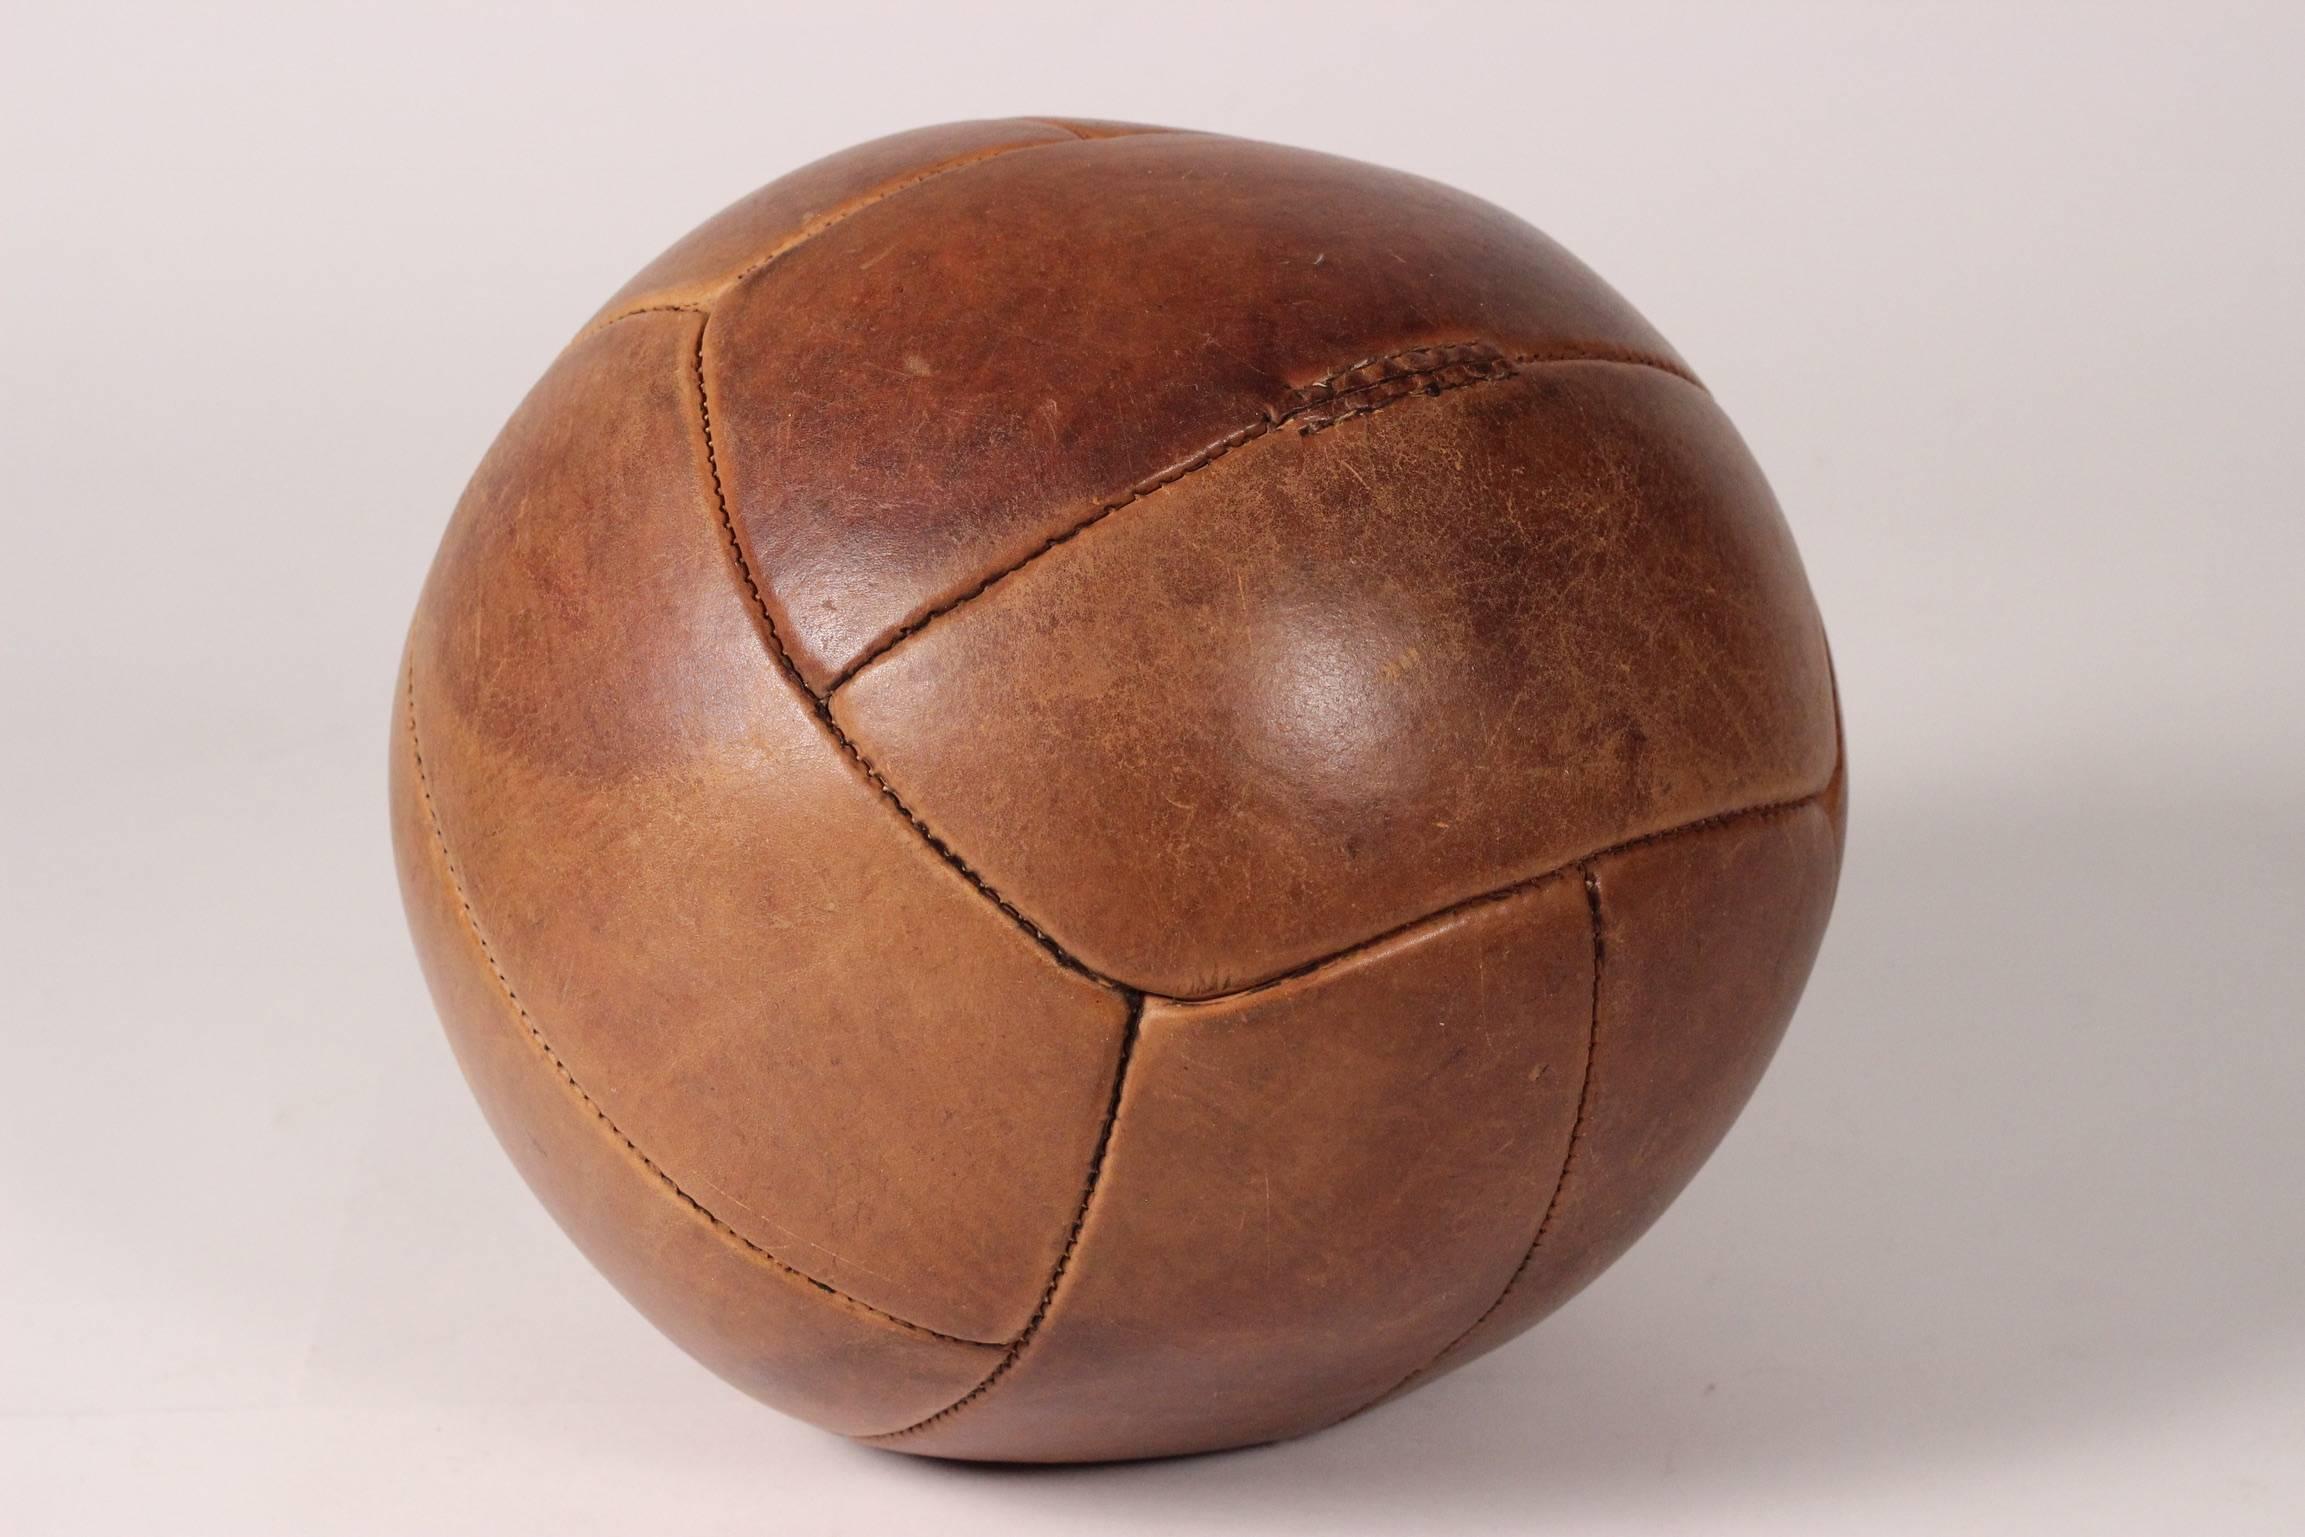 Early to mid-20th century leather medicine ball in good condition with wonderful patina that only comes with genuine wear and age.